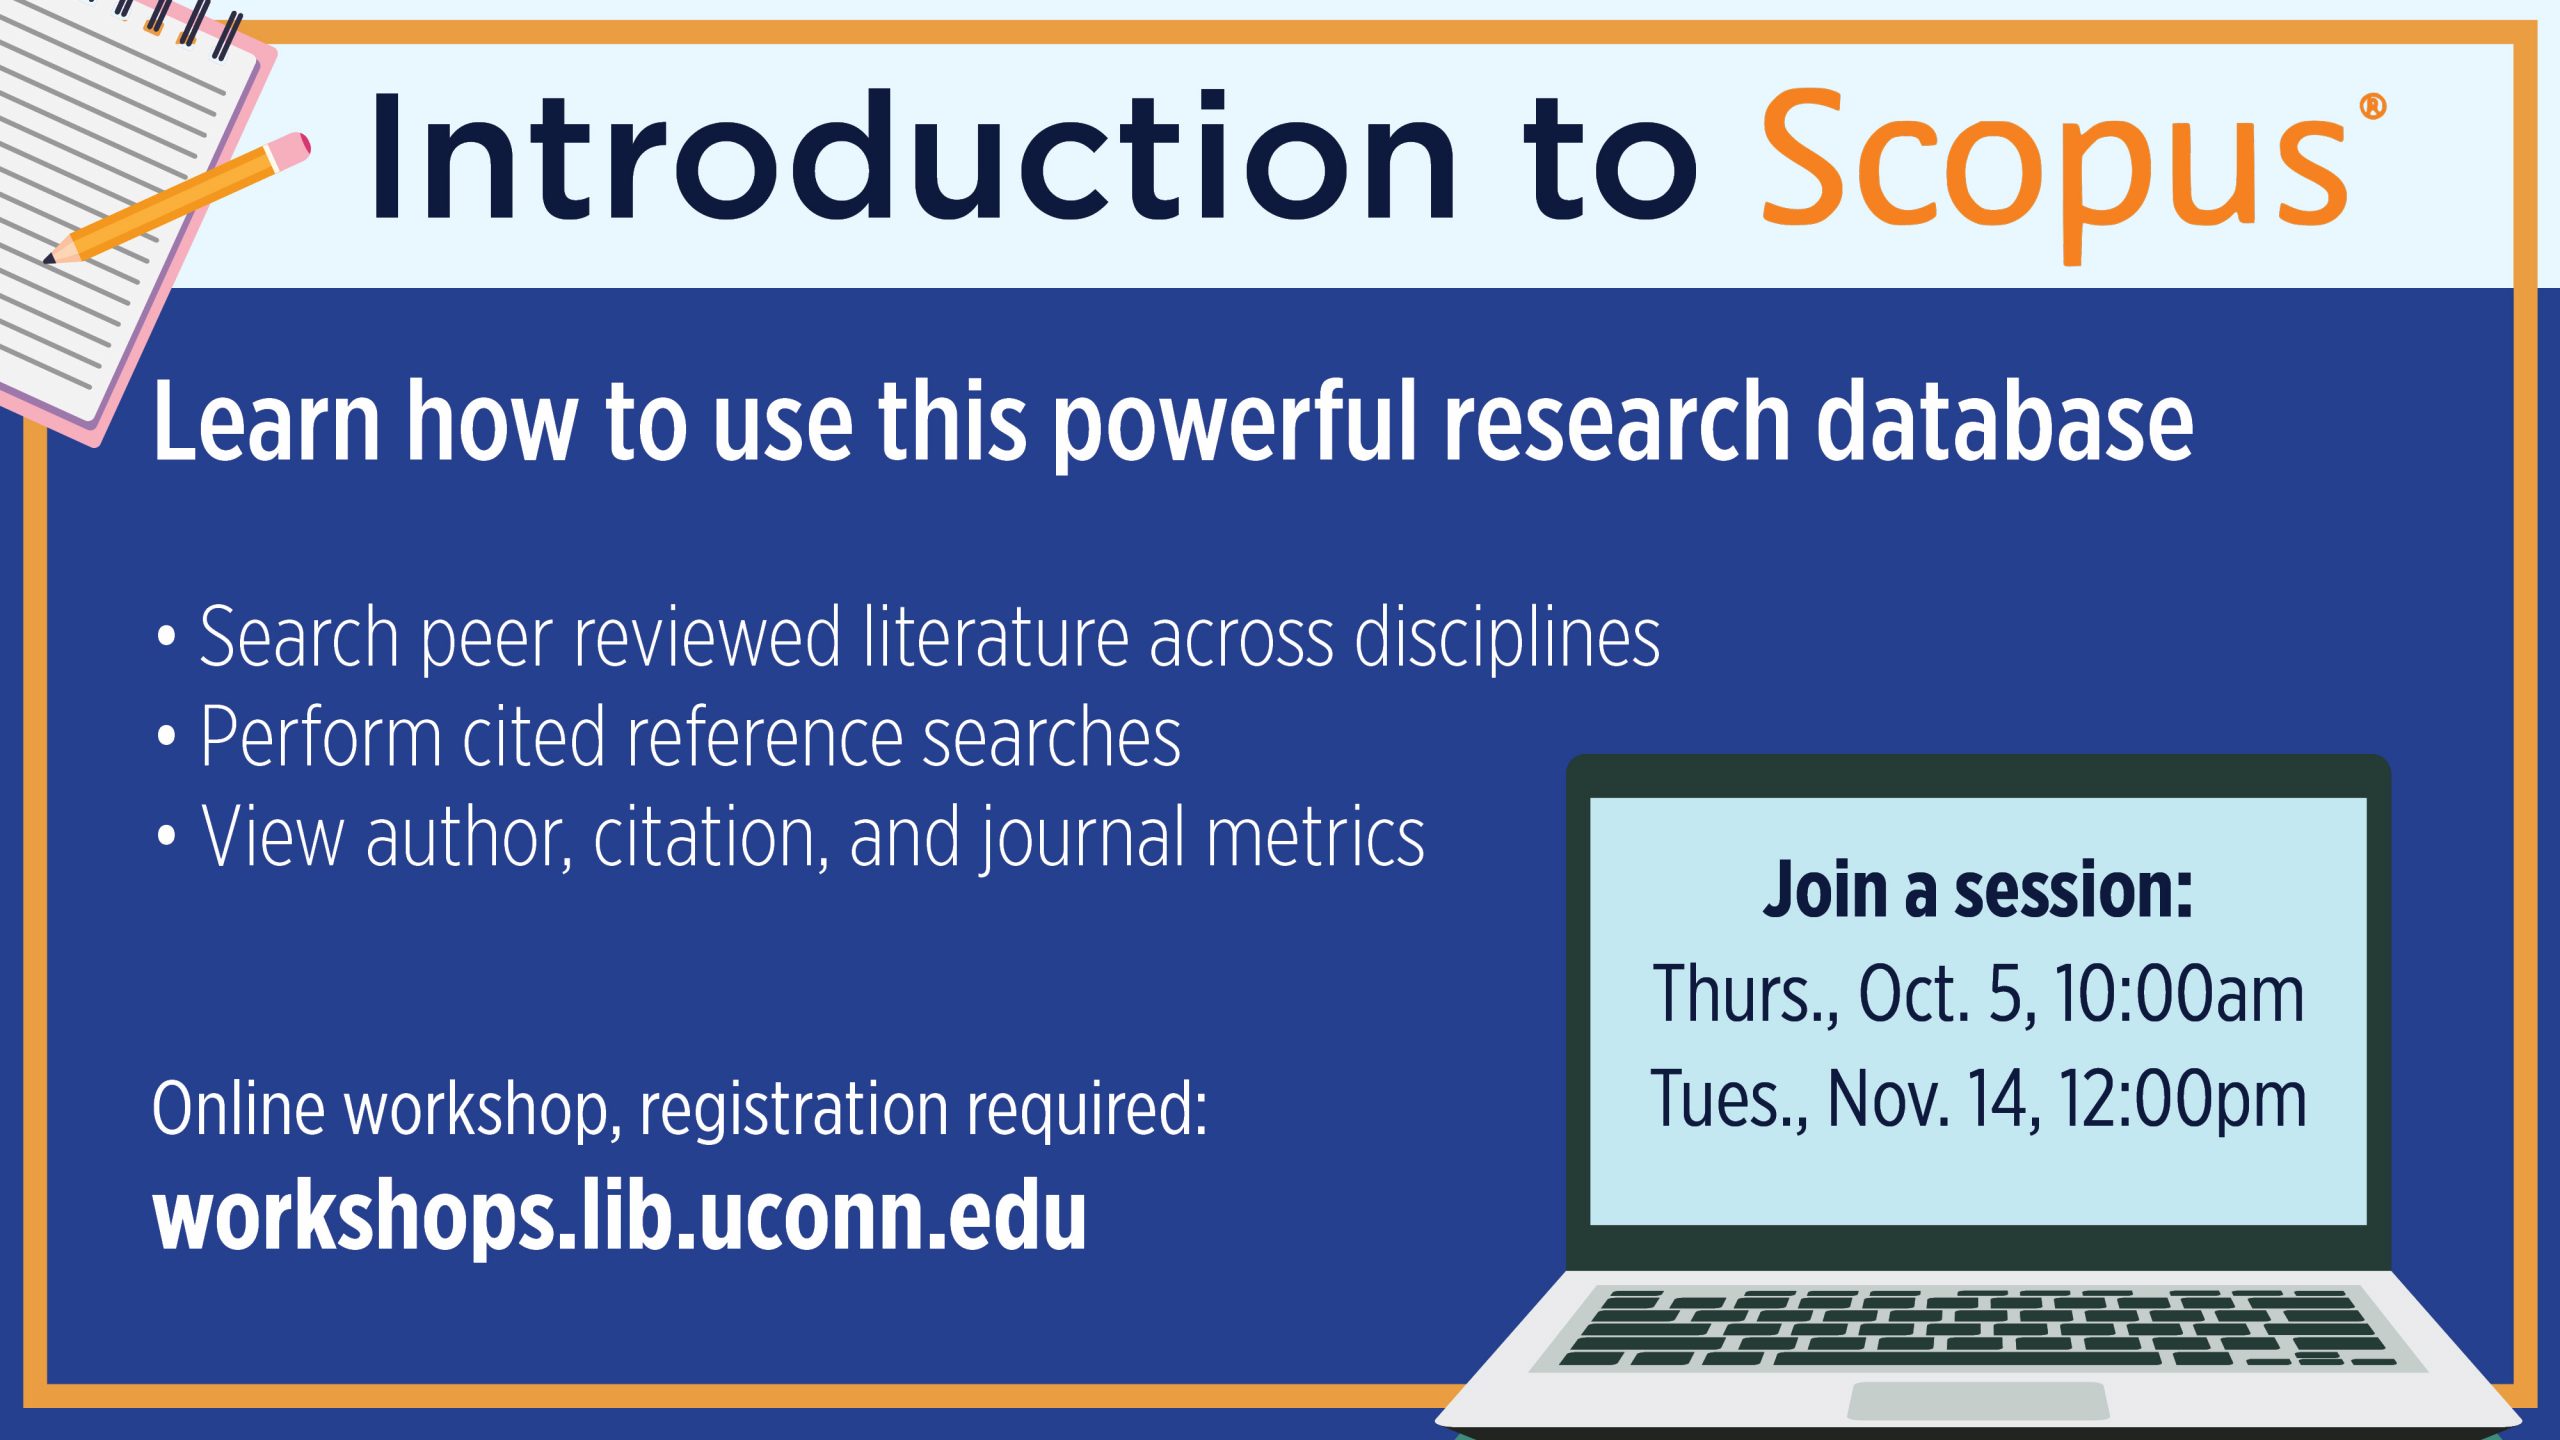 Online Workshop: Introduction to Scopus. Learn how to use this powerful research database to search peer reviewed literature across disciplines. Learn more at workshops.lib.uconn.edu